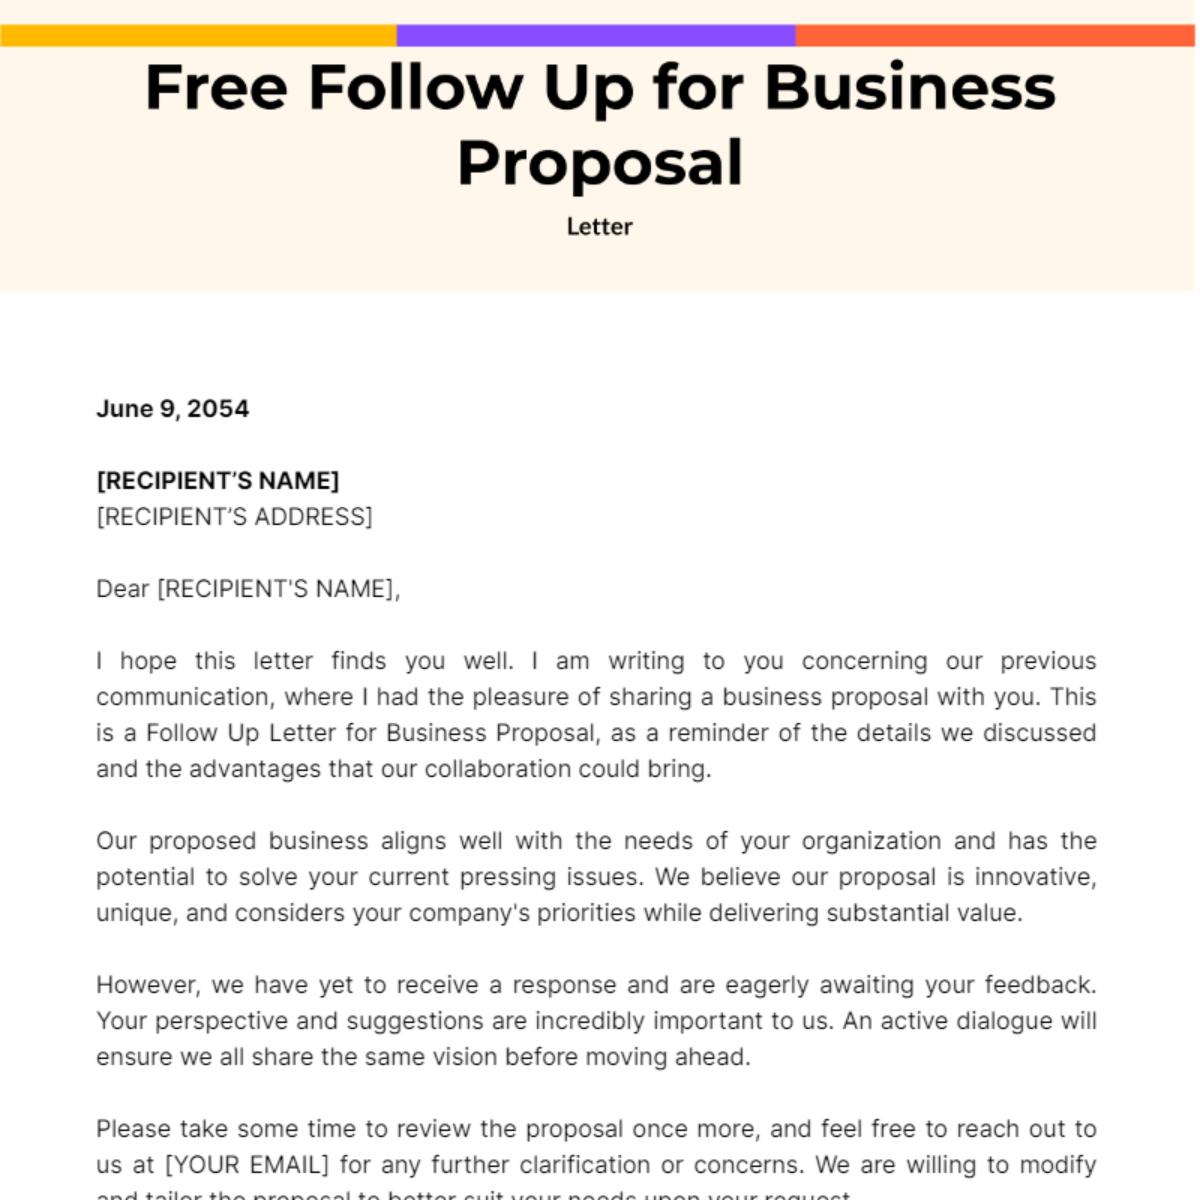 Follow Up Letter for Business Proposal Template